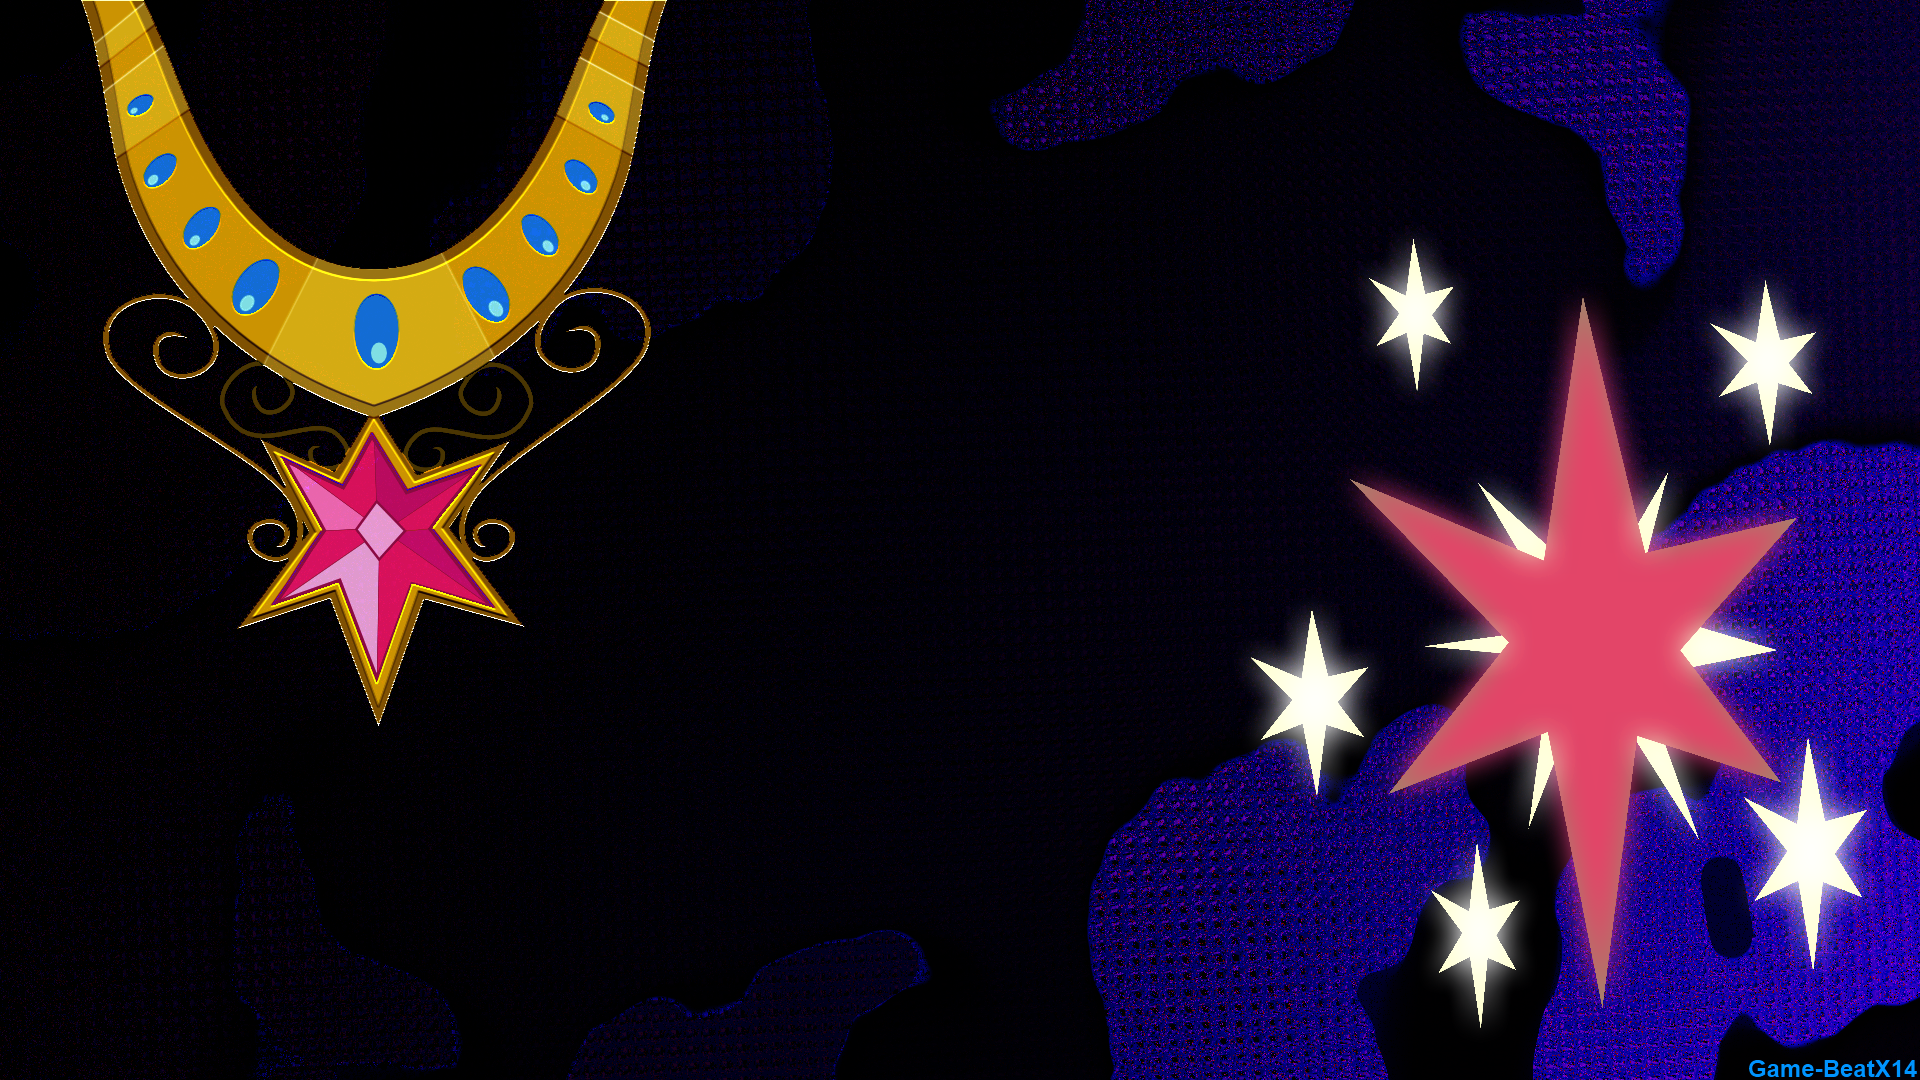 Twilight Sparkle Magic Wallpaper (Fancy version) by BlackGryph0n, Game-BeatX14 and pageturner1988